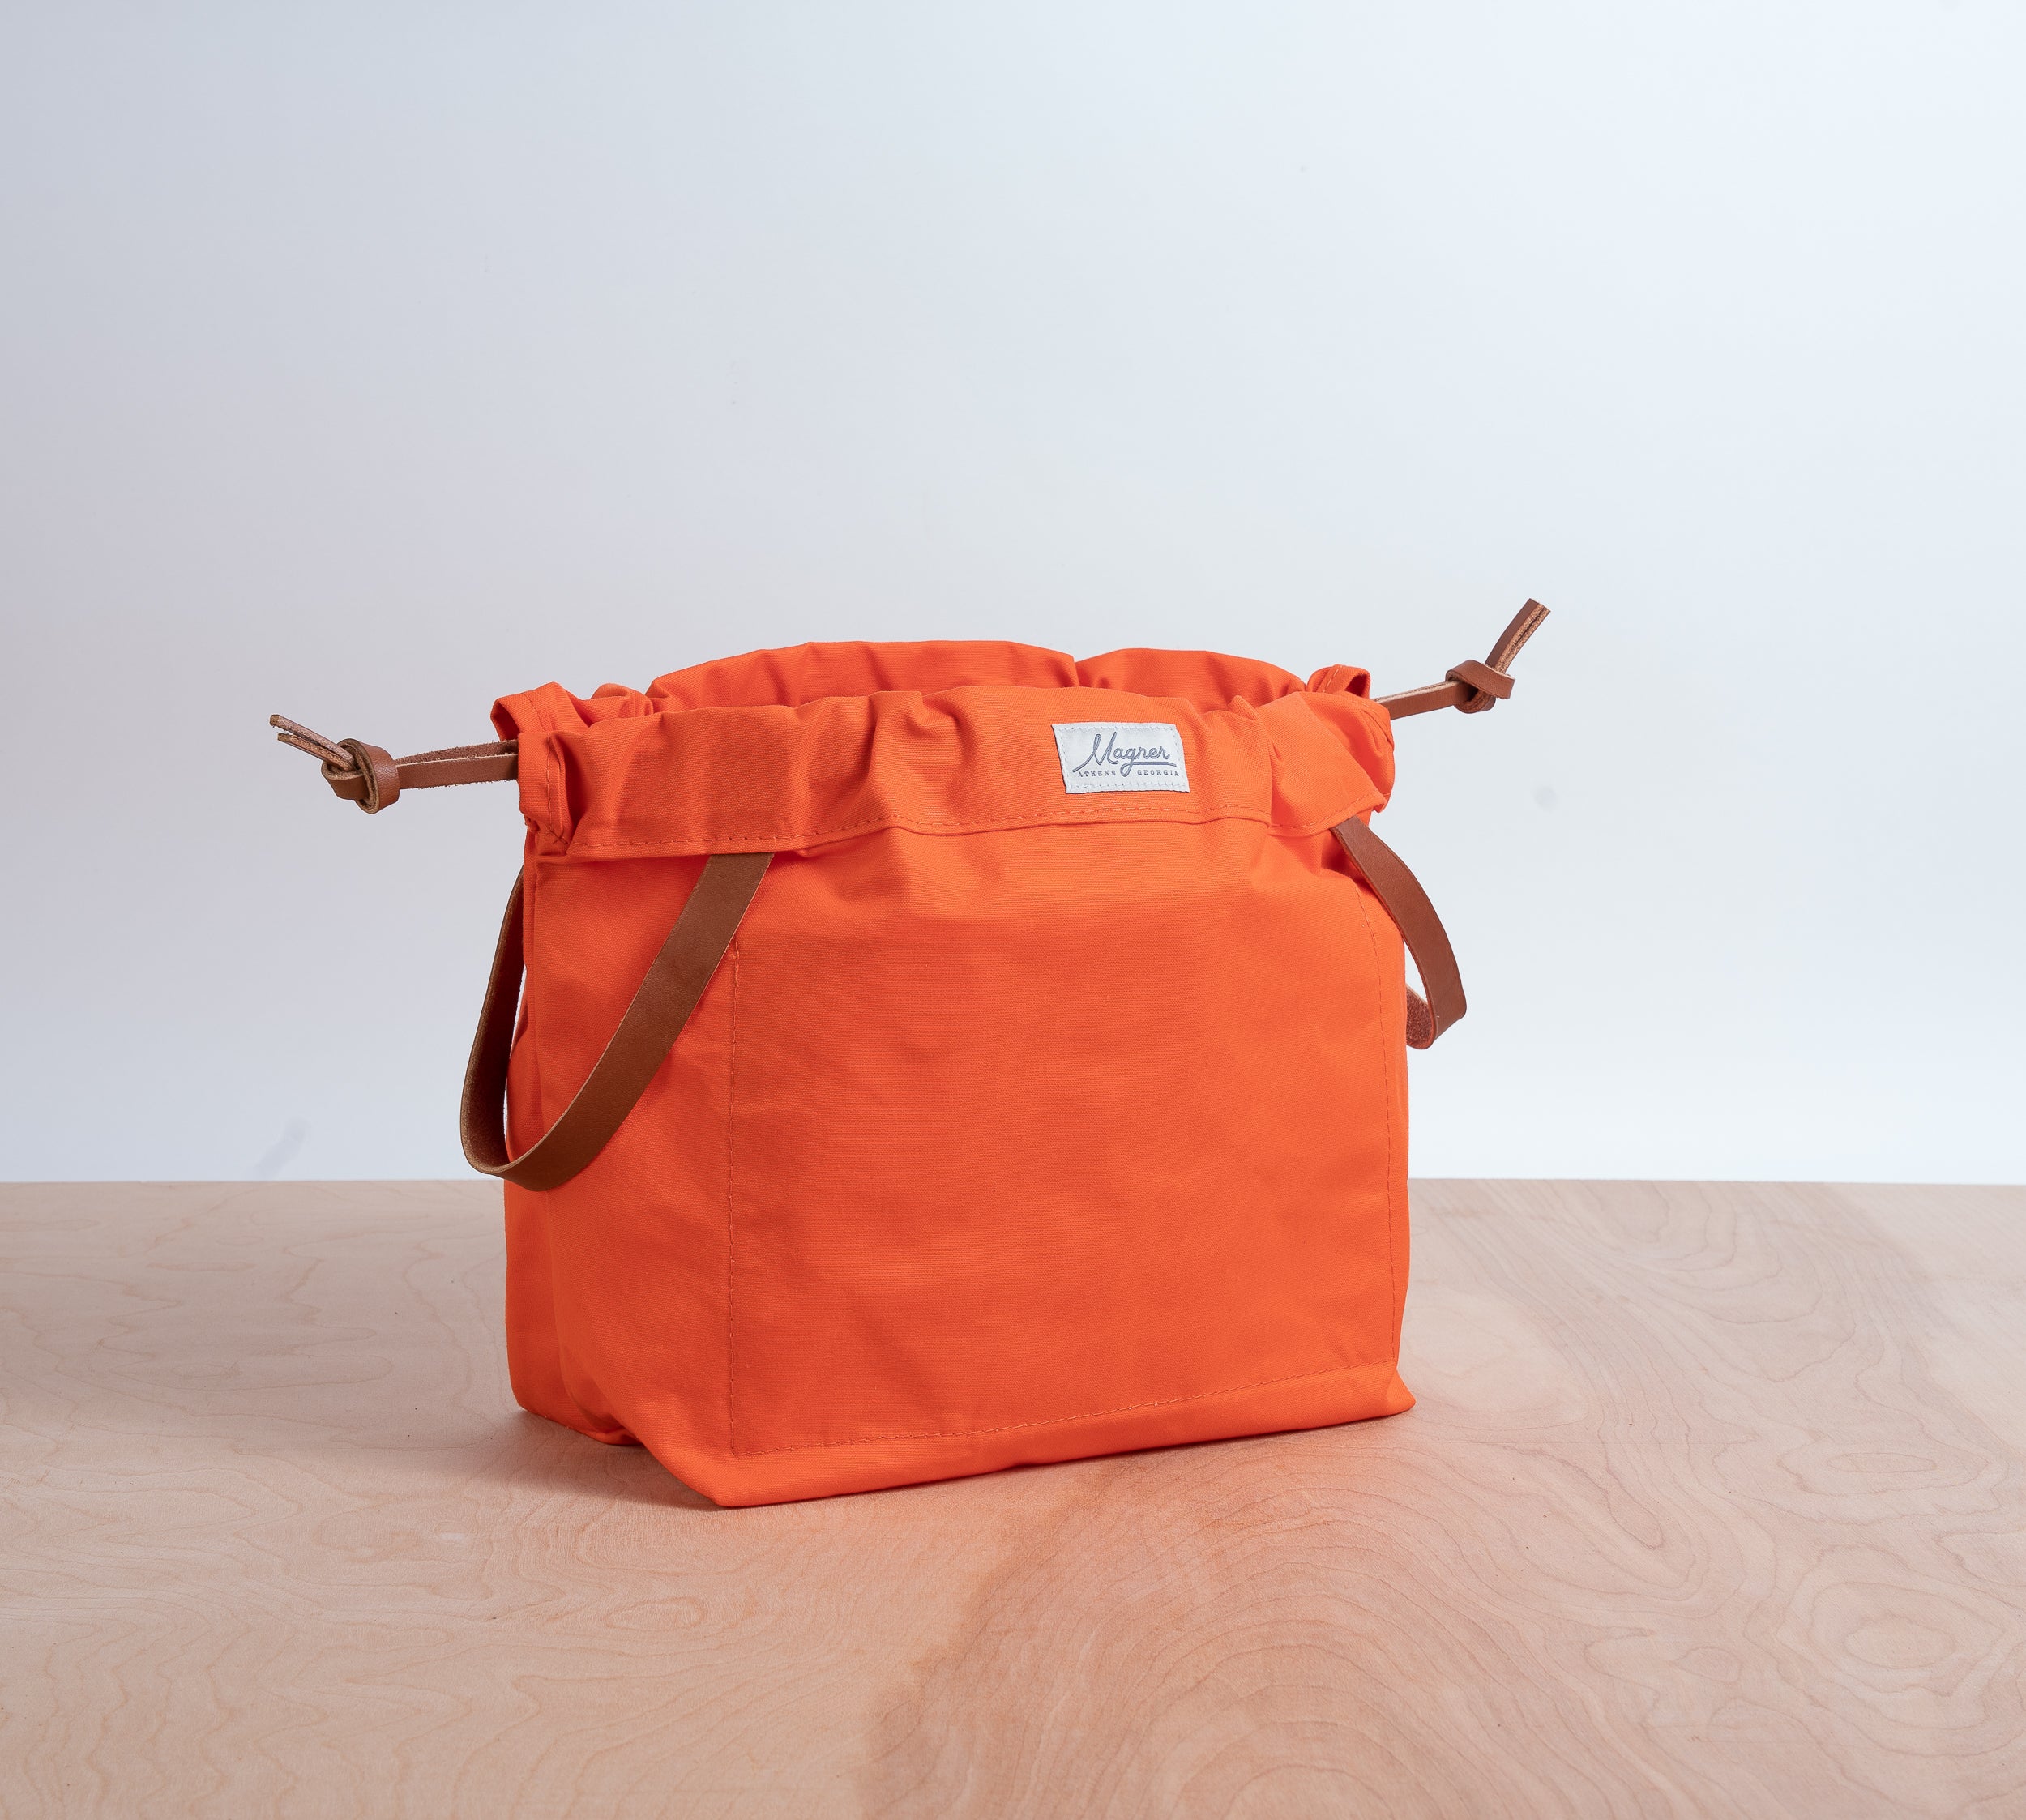 Magner Co. Knitty Gritty Project Bag - Original Size